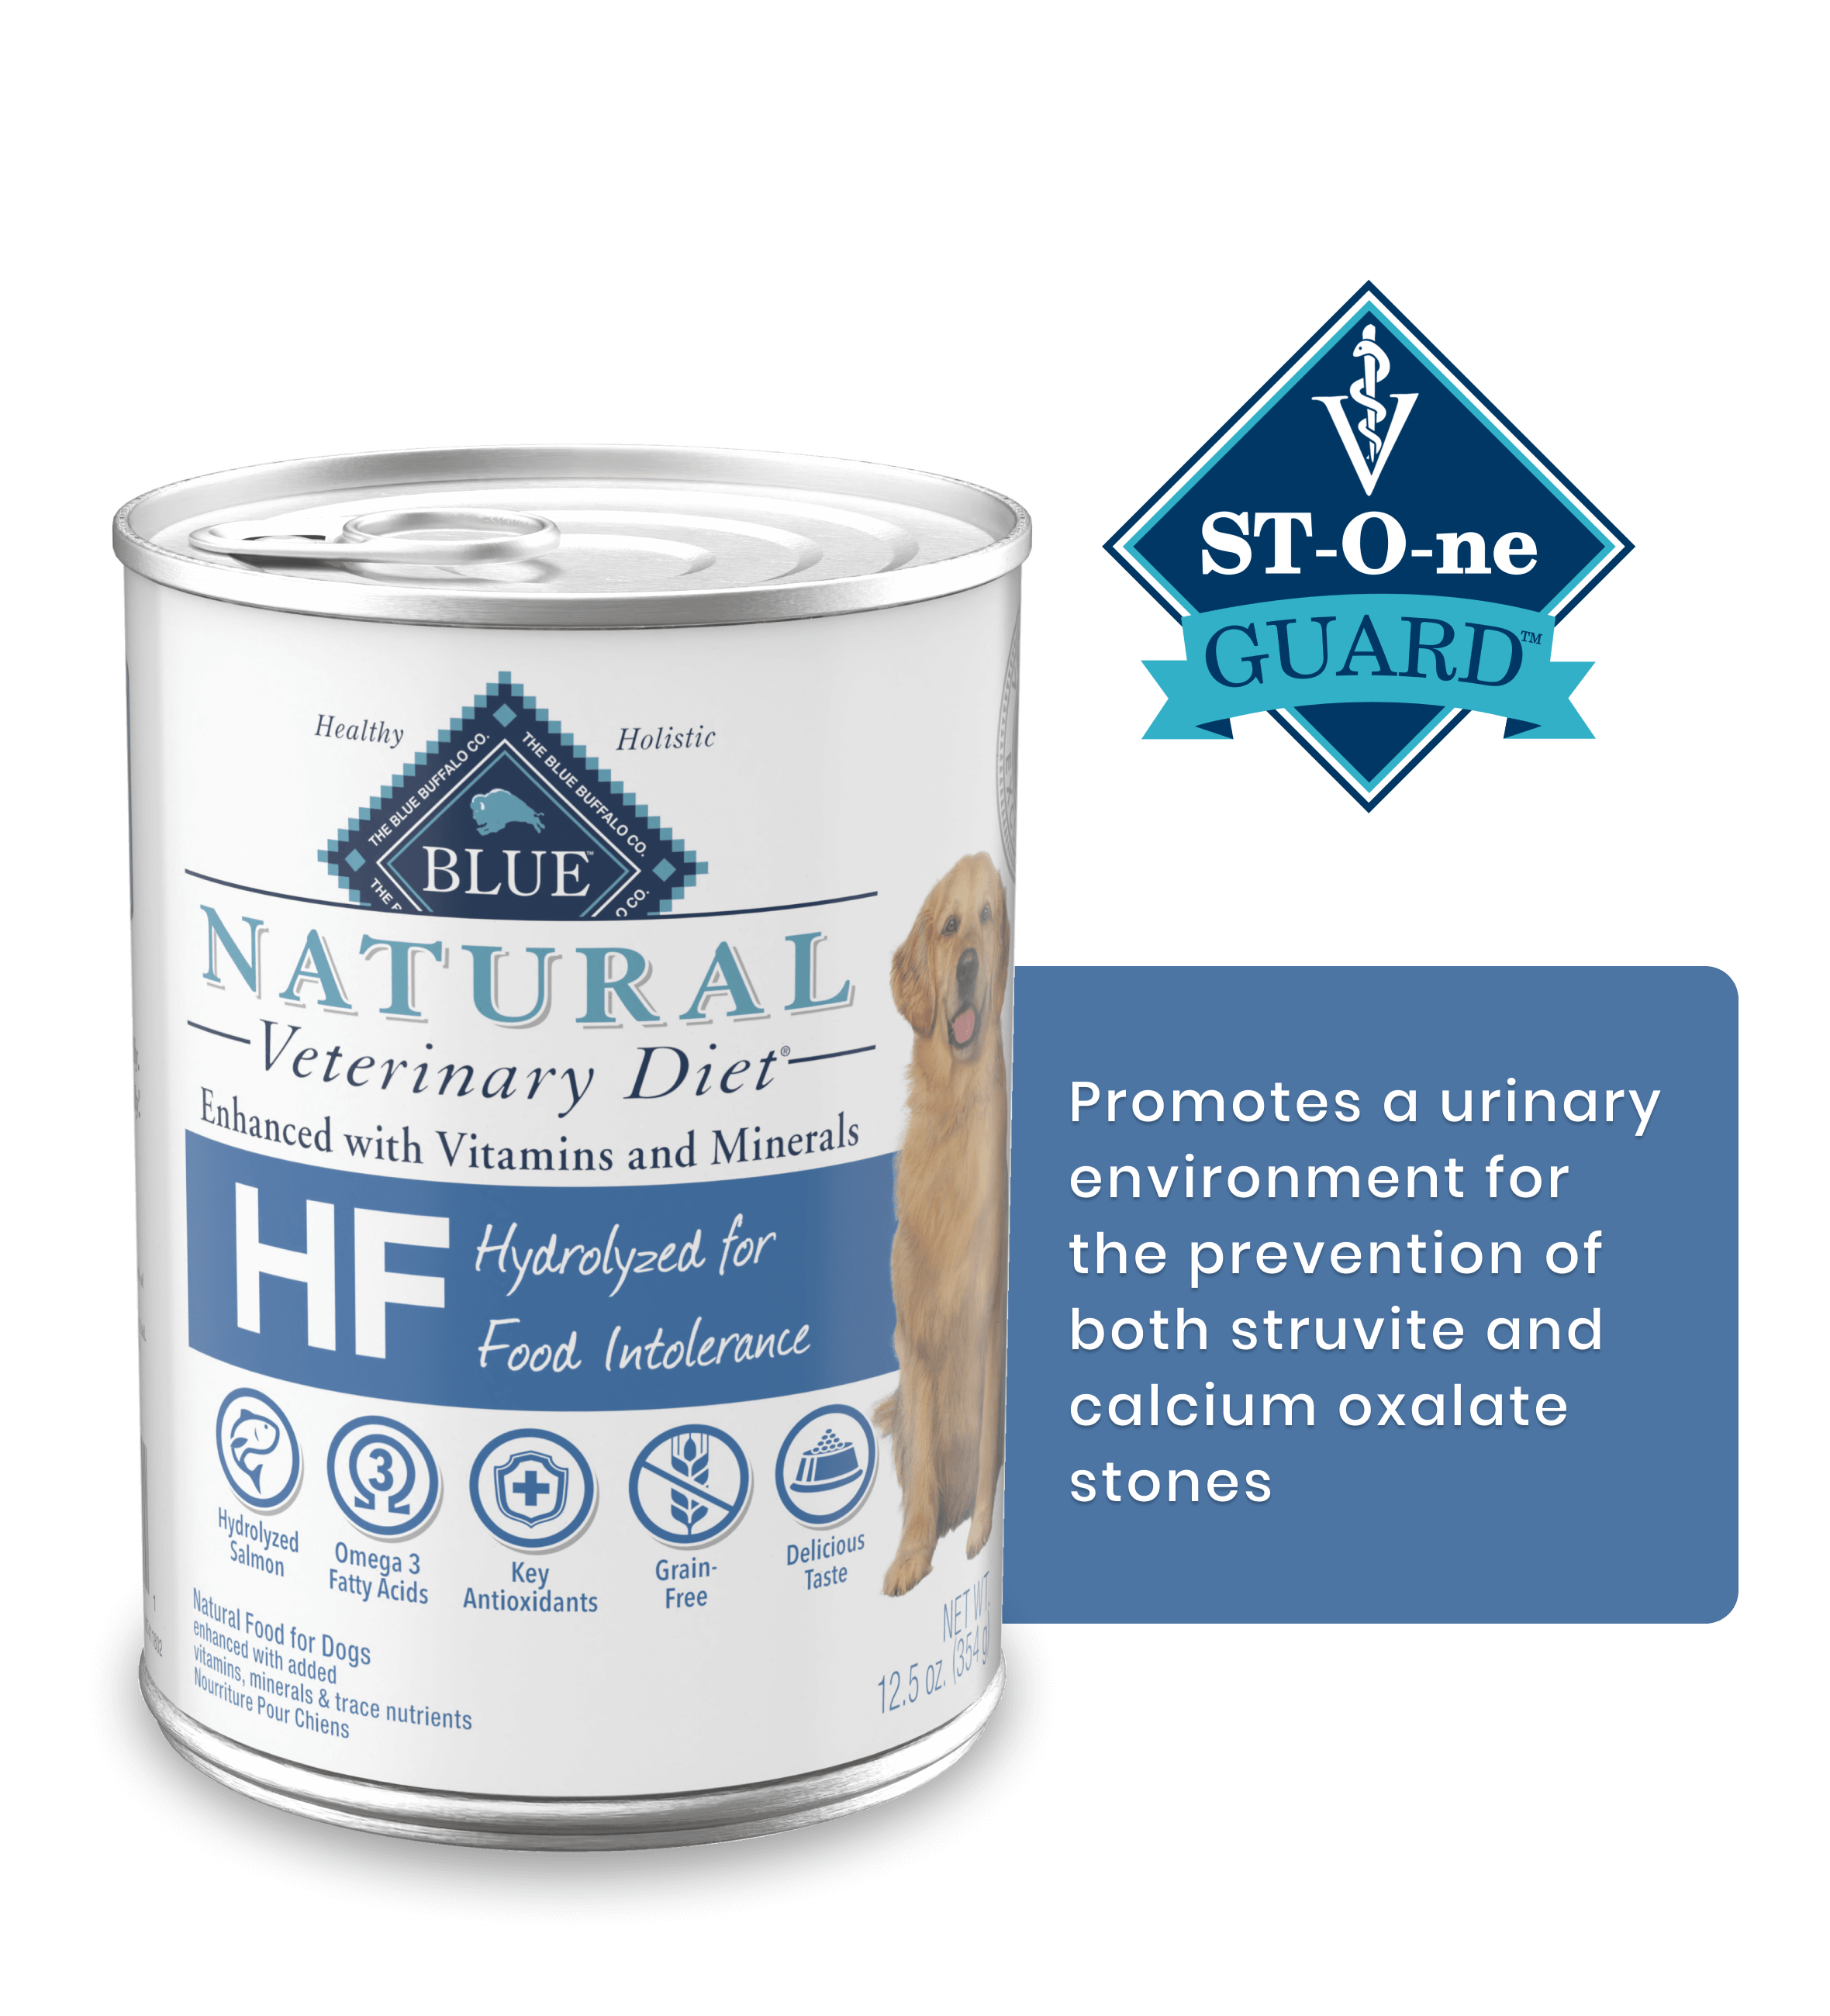 HF Hydrolyzed for Food Intolerance St-O-ne Guard Promotes a urinary environment for the prevention of both struvite and calcium oxalate stones